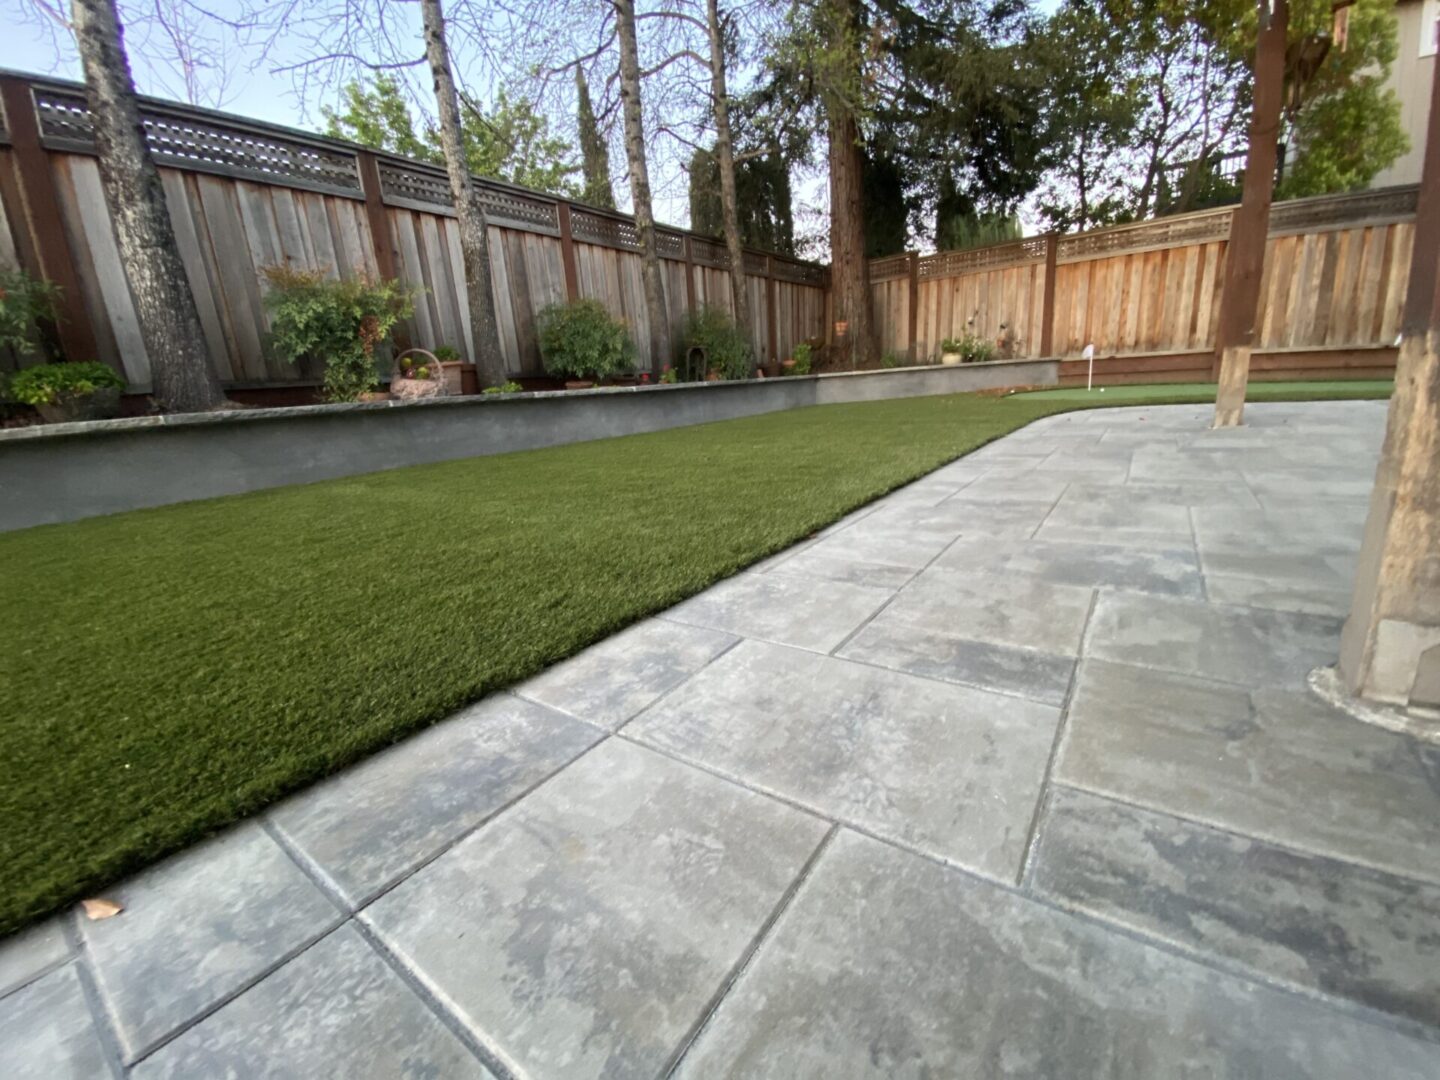 Artificial lawn with concrete, trees, landscaping service by Guys Yard Design in Sonoma, CA